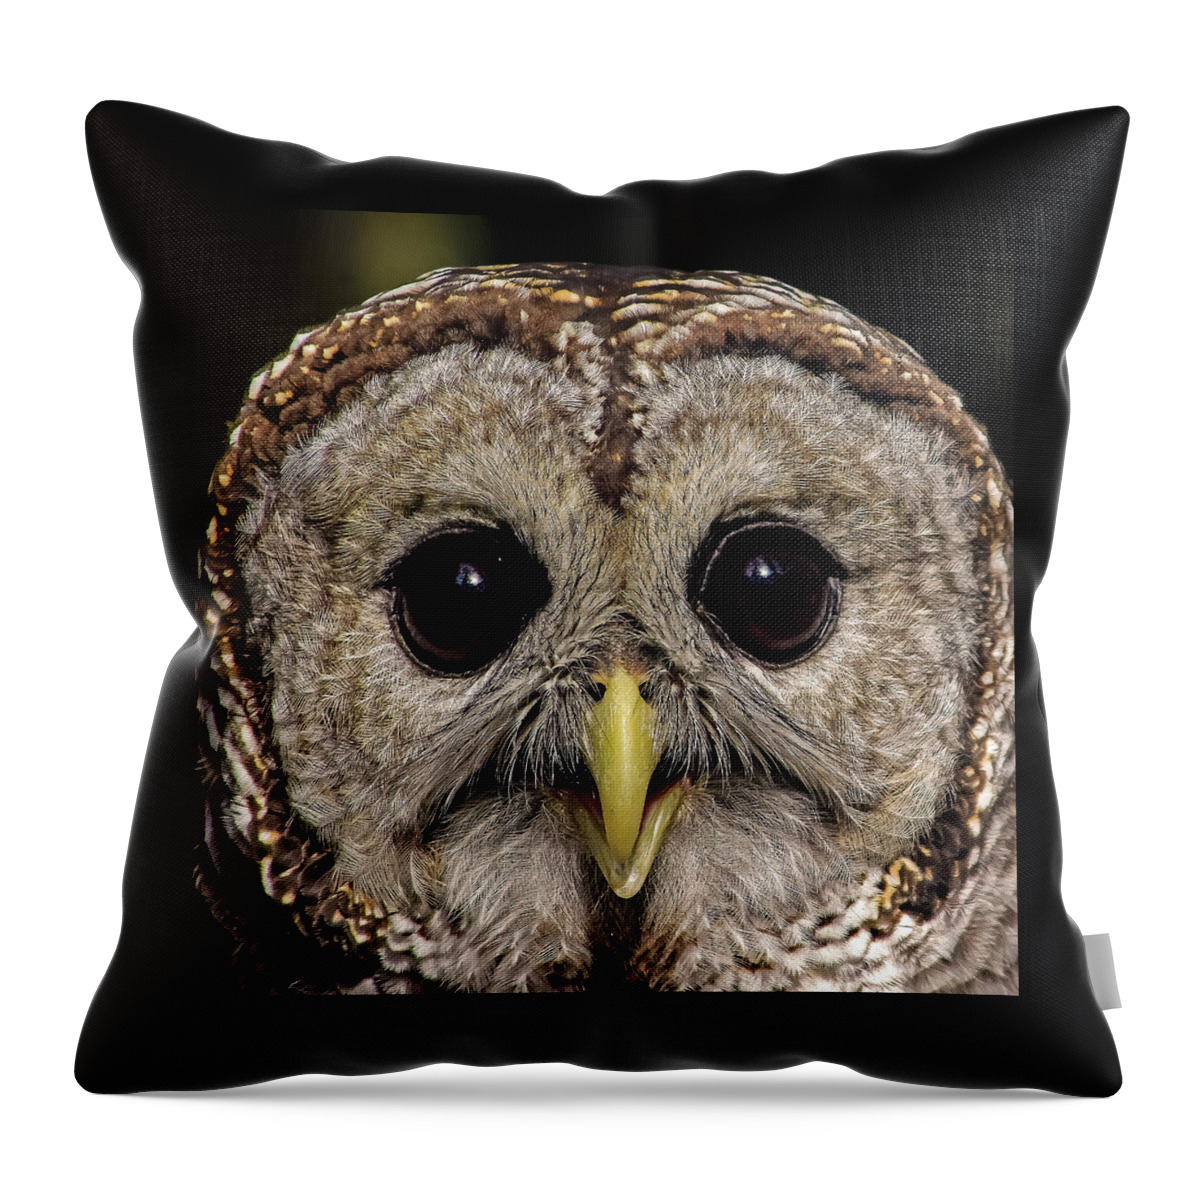 Owl Throw Pillow featuring the photograph Who's There by Michael Allard